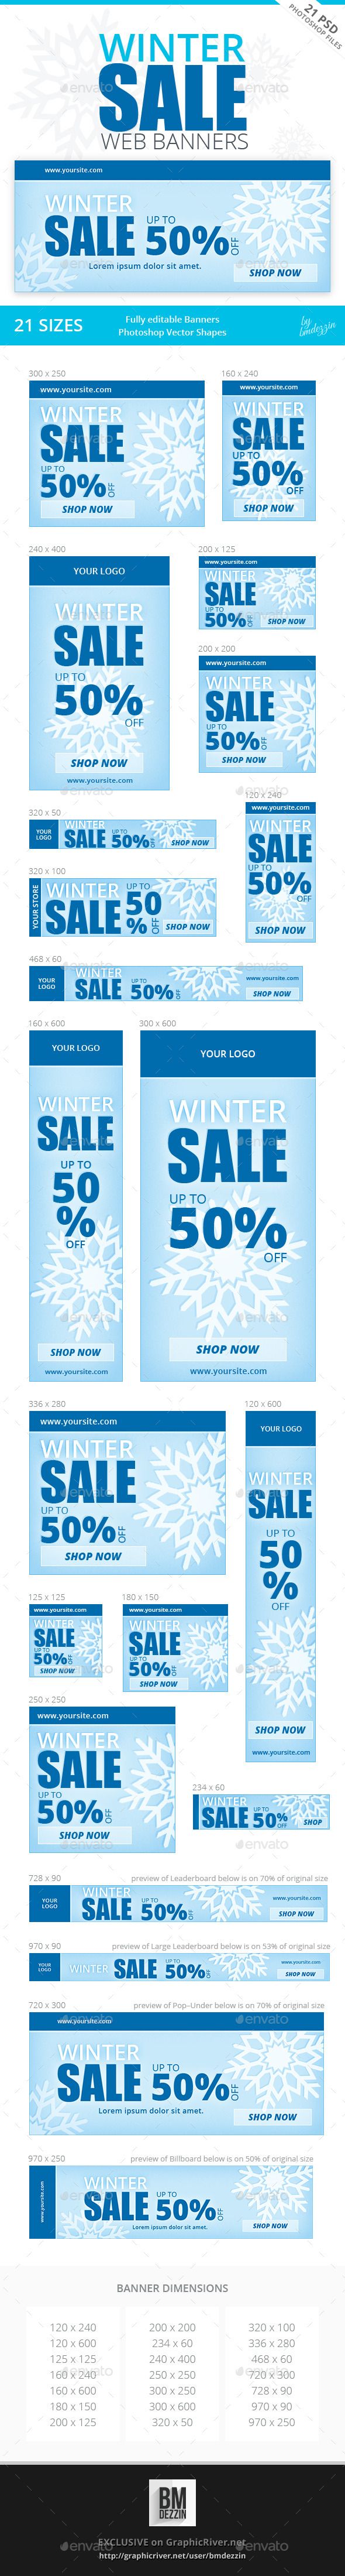 Advertising-Infographics-Winter-Sale-Web-Banners-Template-PSD-Buy-and-Download-graphicriver.net Advertising Infographics : Winter Sale Web Banners Template PSD | Buy and Download: graphicriver.net/...